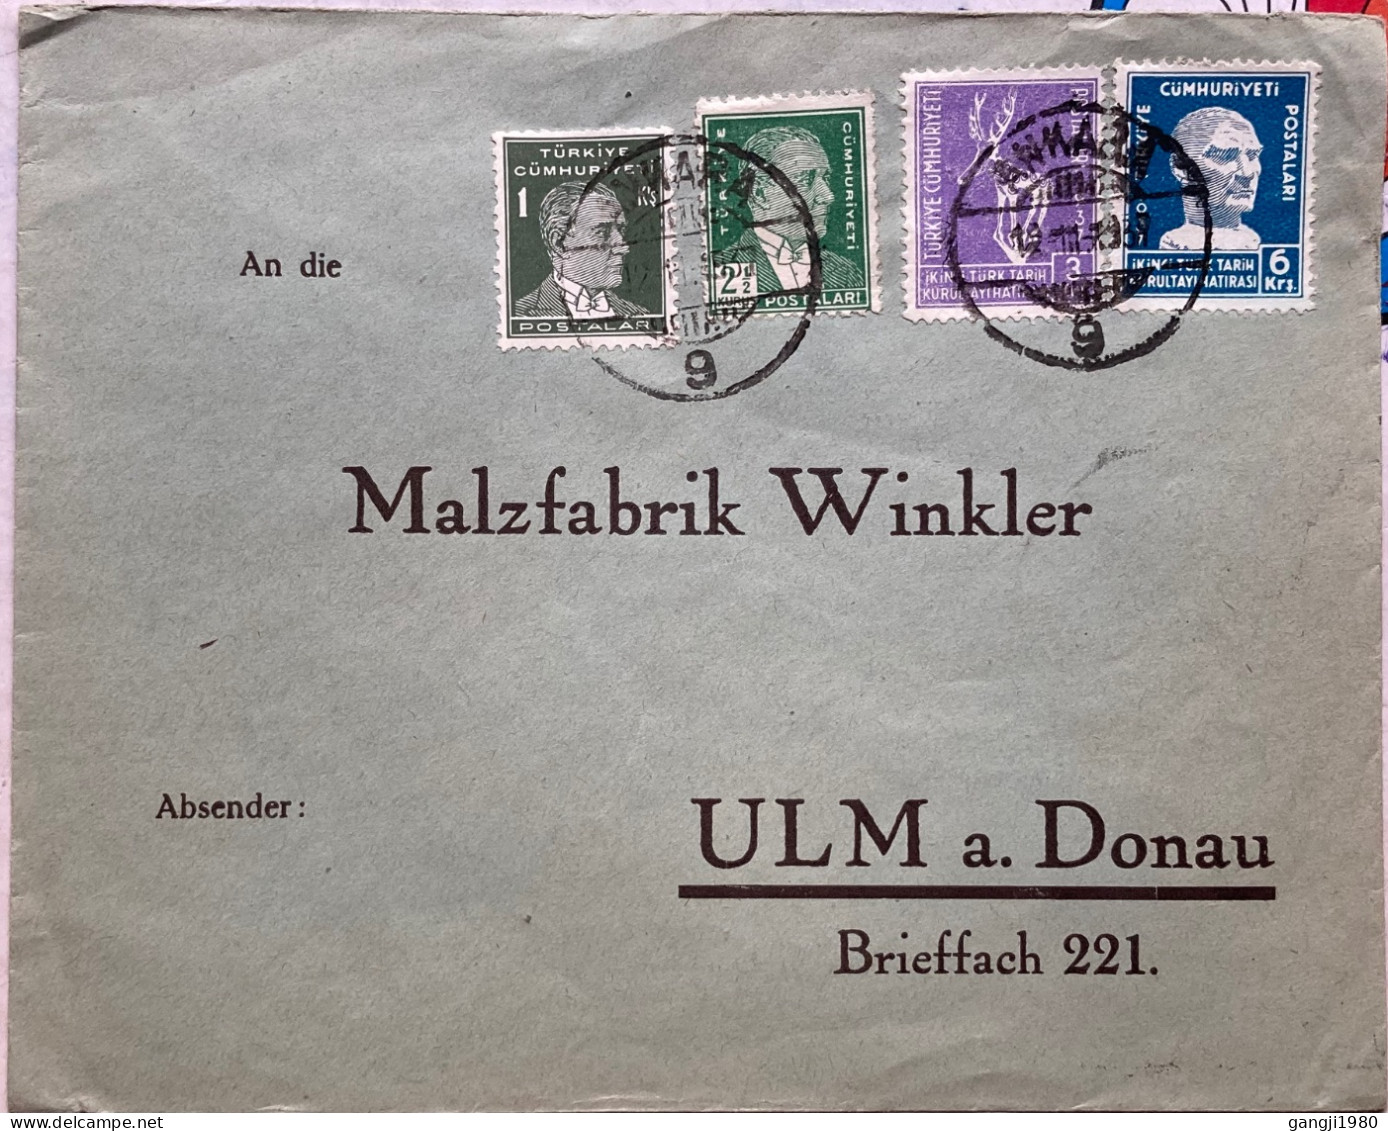 TURKEY 1940, COVER USED TO GERMANY, 4 DIFFERENT STAMP, ANIMAL, PRESIDENT KEMAL ATATURK, ANKARA CITY CANCEL. - Covers & Documents